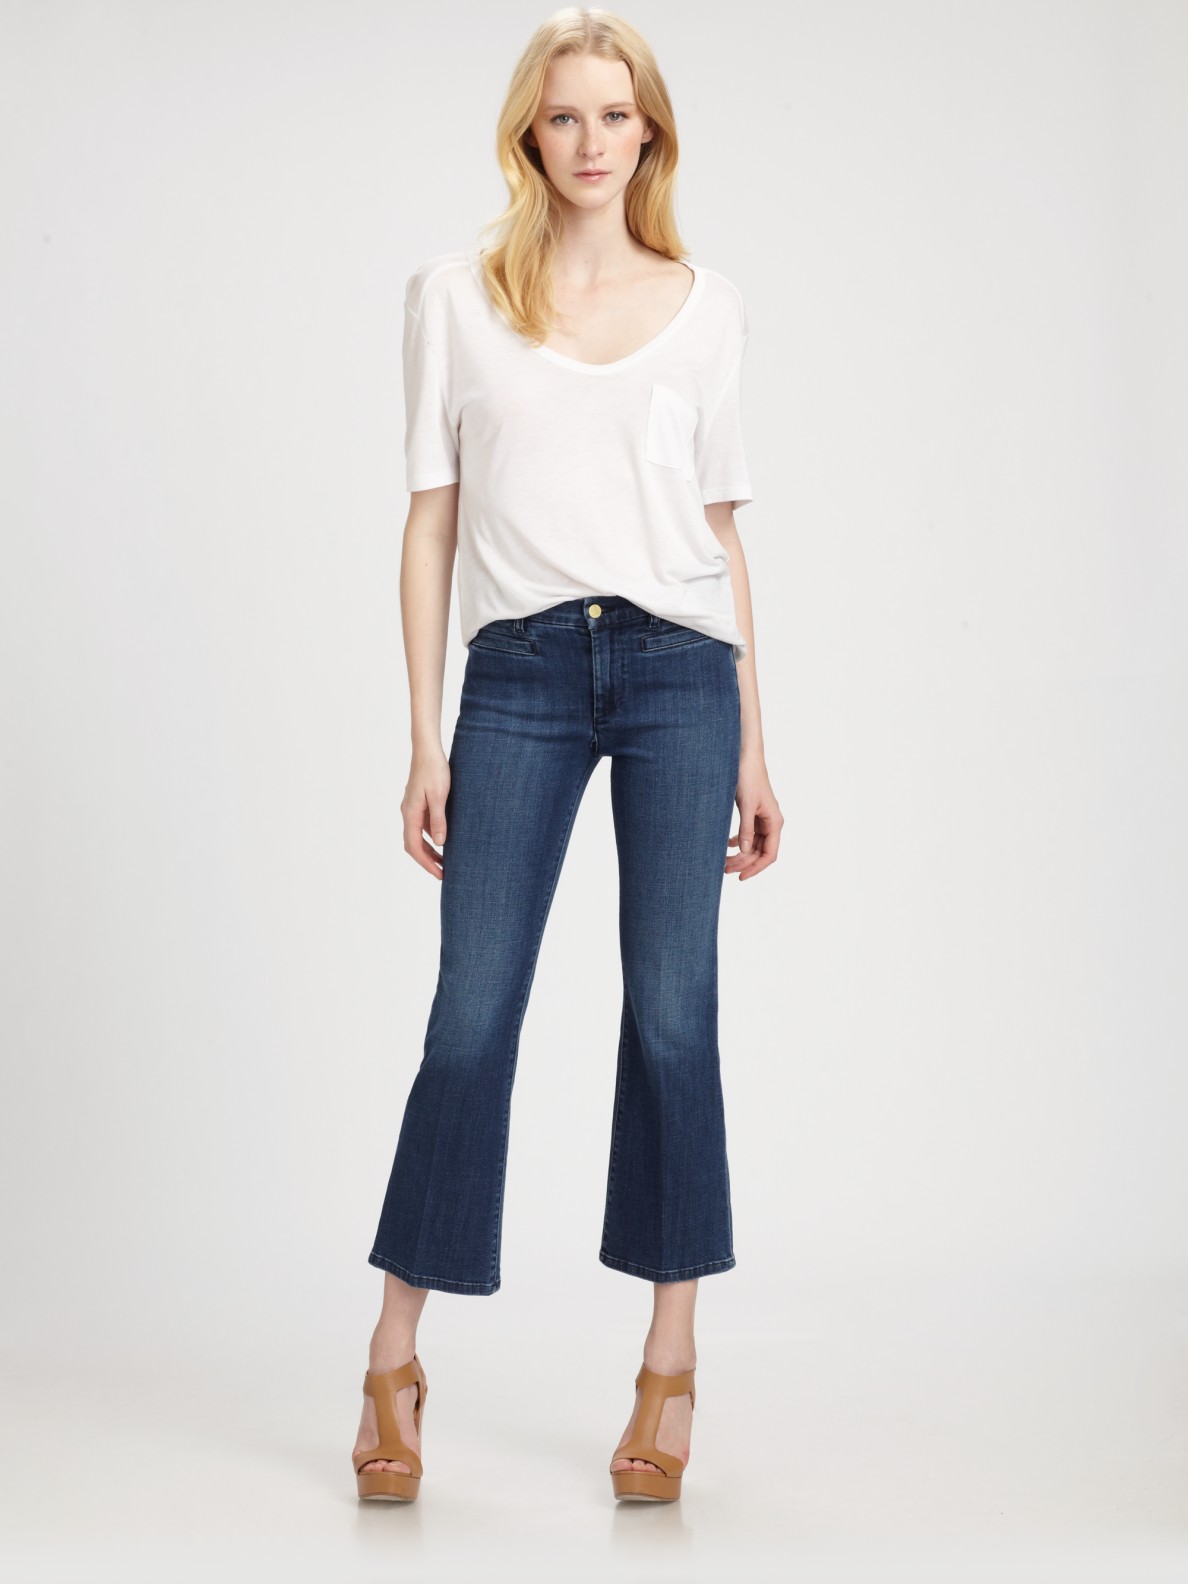 M.i.h Jeans Monaco Cropped Kick Flare Jeans in Blue - Lyst